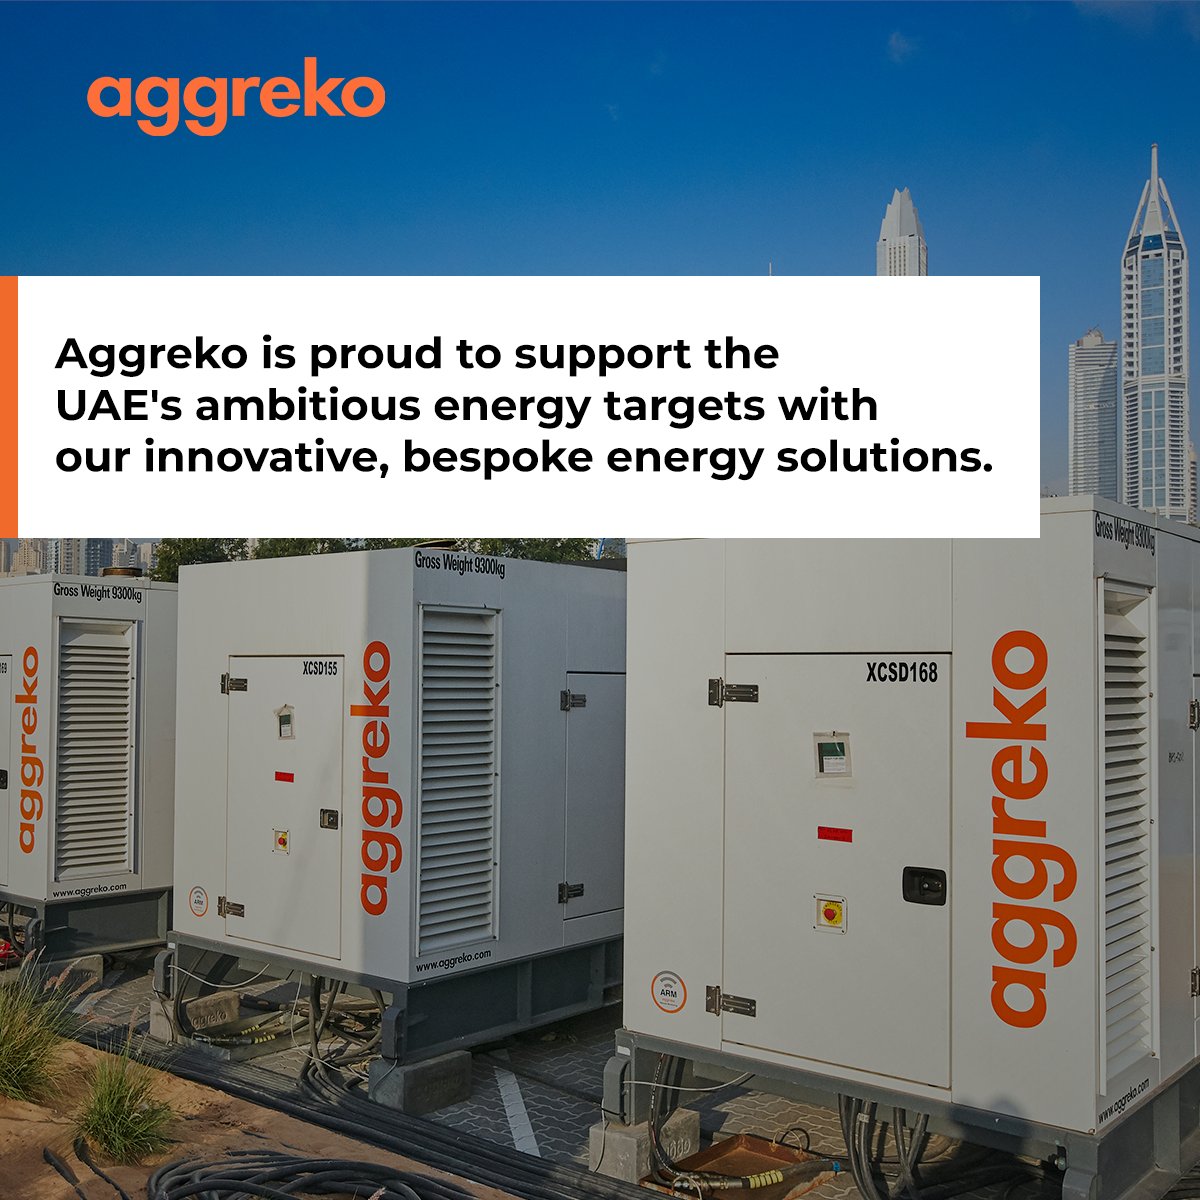 Aggreko is proud to support the UAE’s 2050 energy strategy and net zero ambitions to triple the share of renewable energy and increase the contribution of clean energy generation to 32% by 2030, we stand ready to provide innovative, bespoke solutions. #EnergisingChange #Aggreko